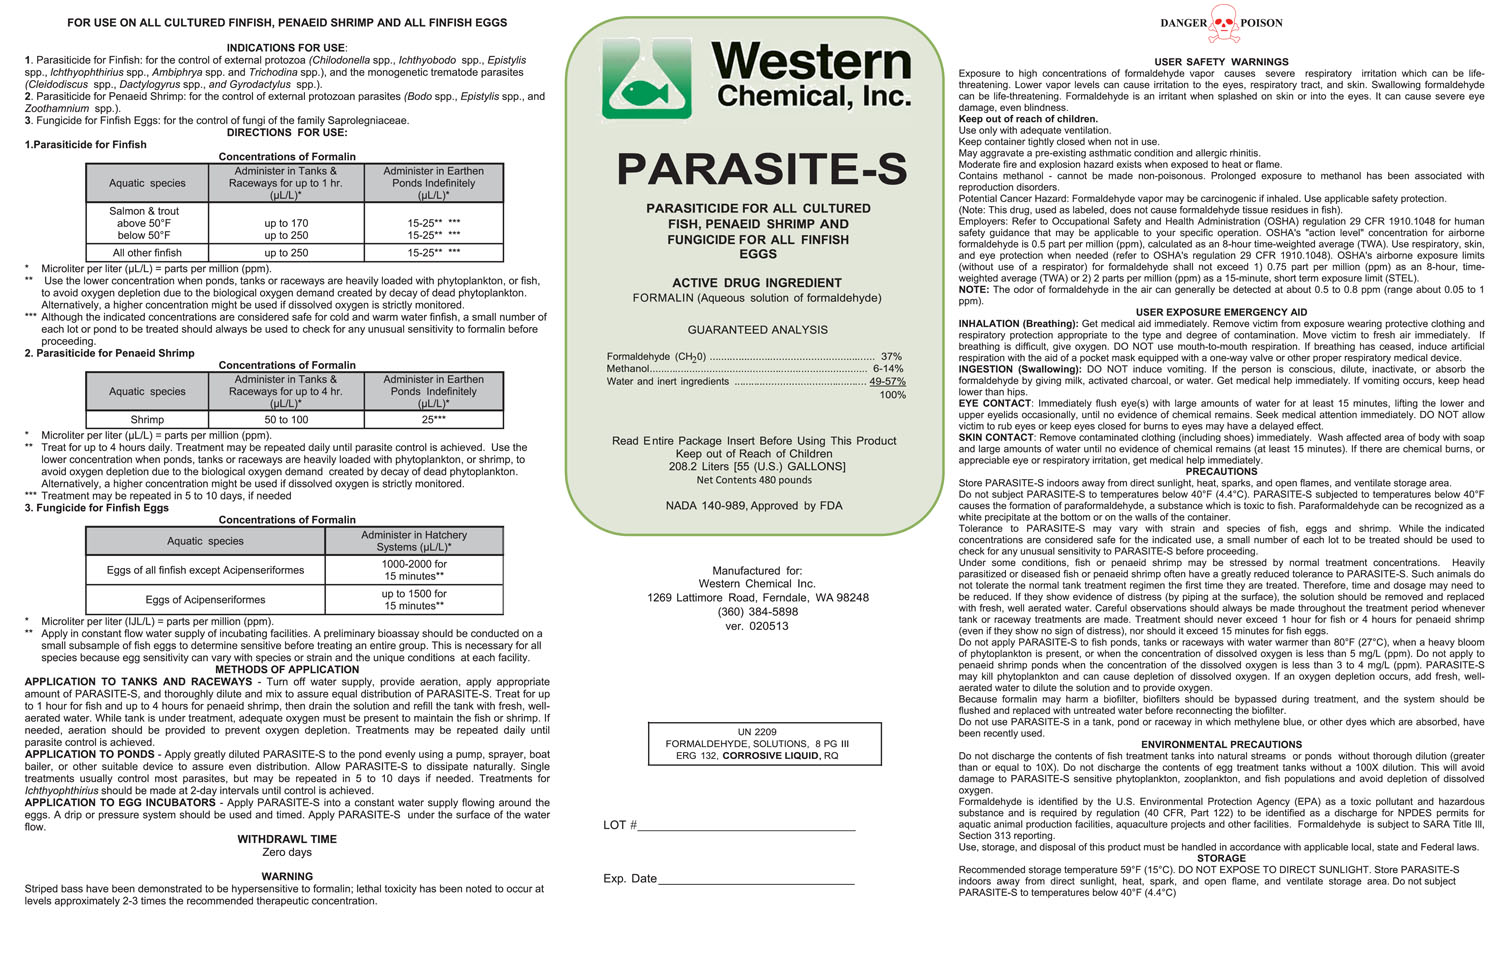 Image of Parasite-S label